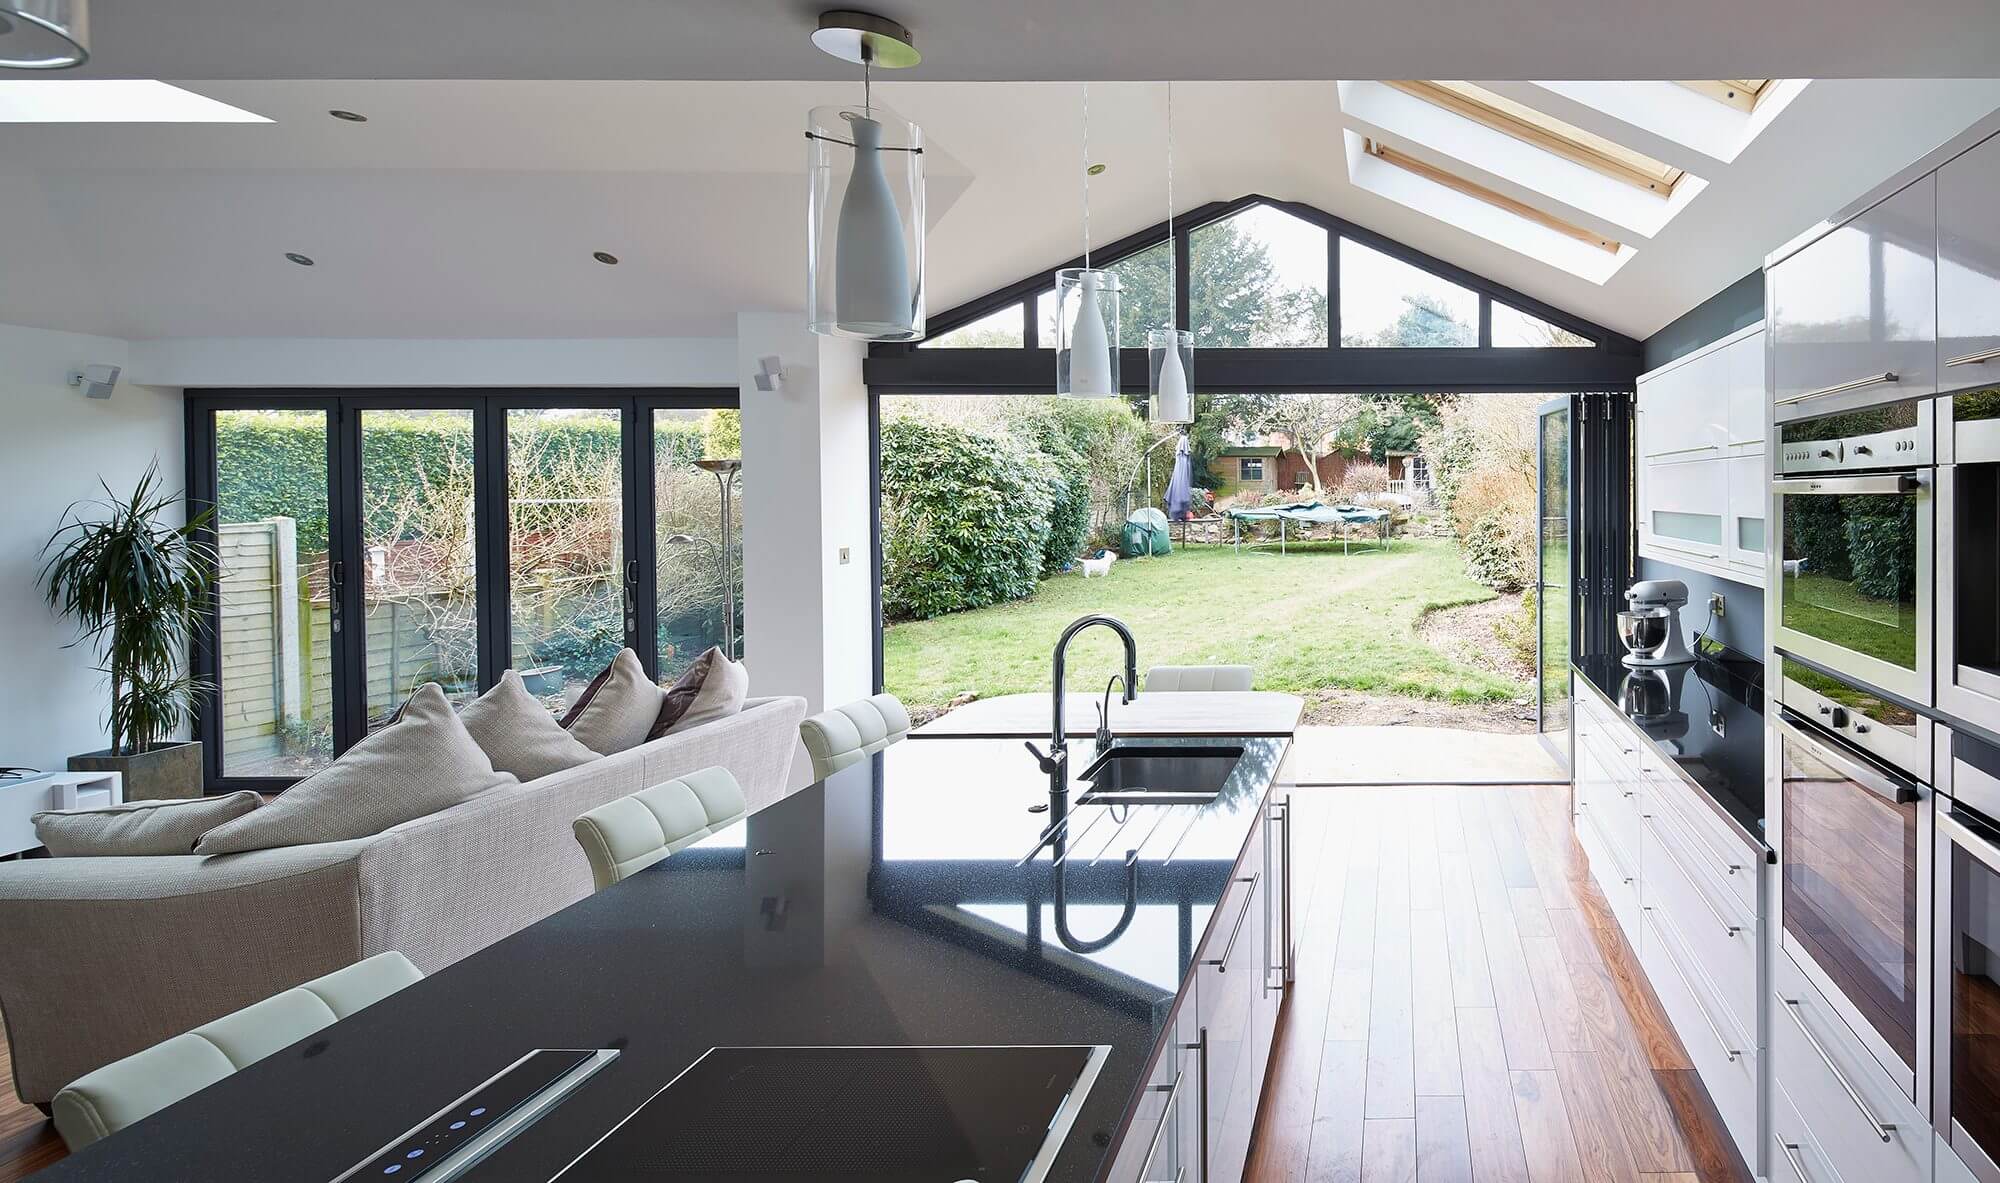 kitchen-diner extension with bifolds